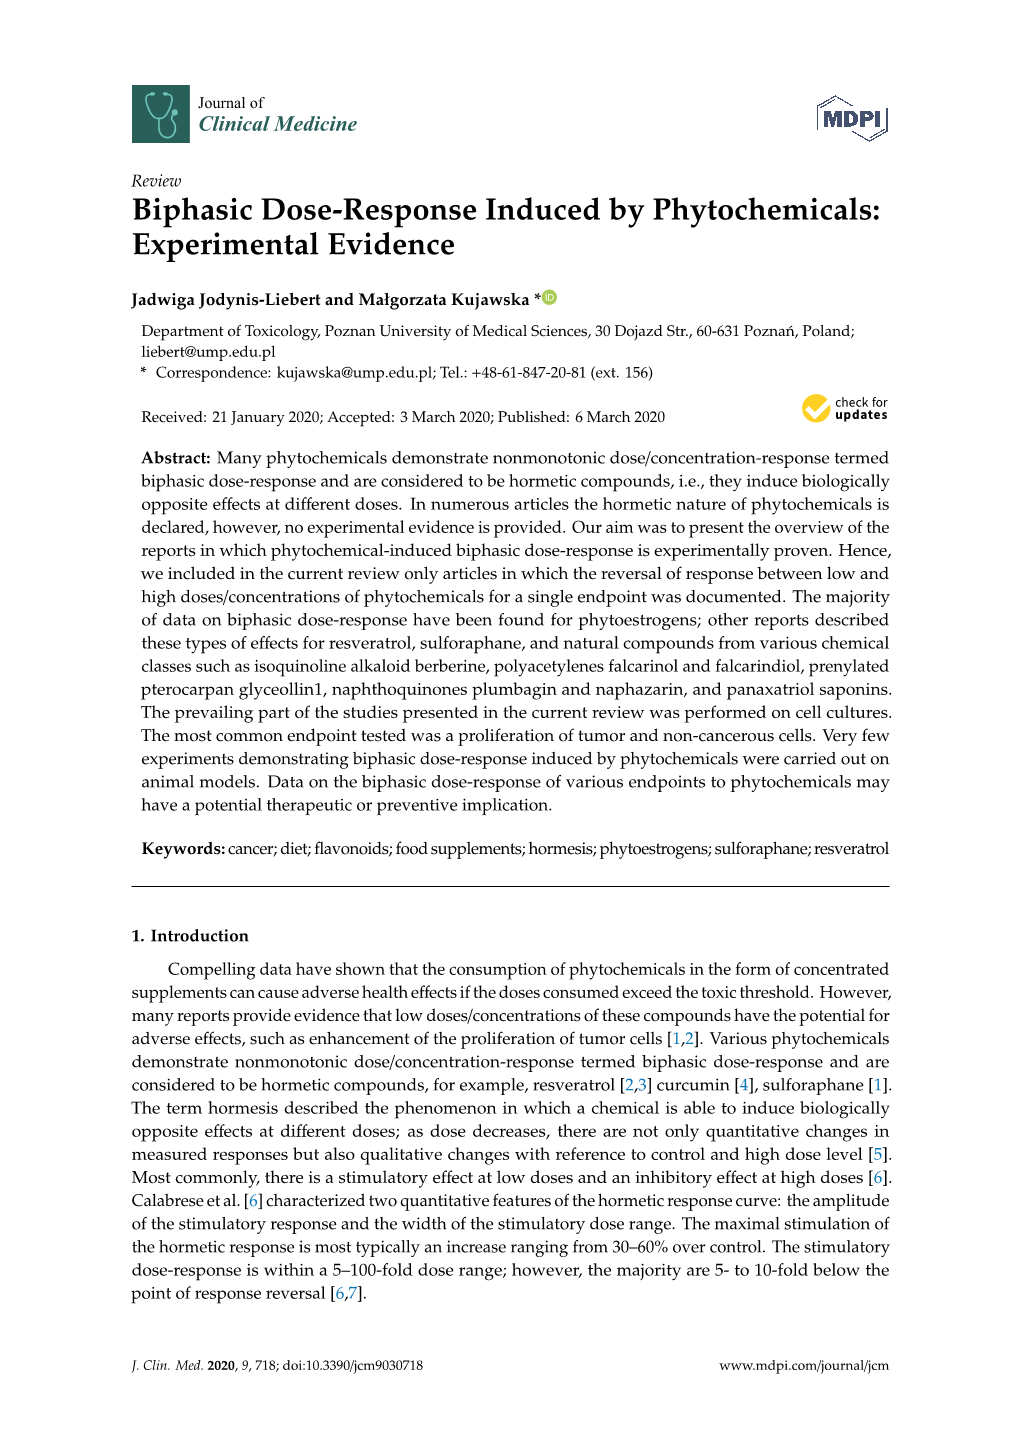 Biphasic Dose-Response Induced by Phytochemicals: Experimental Evidence